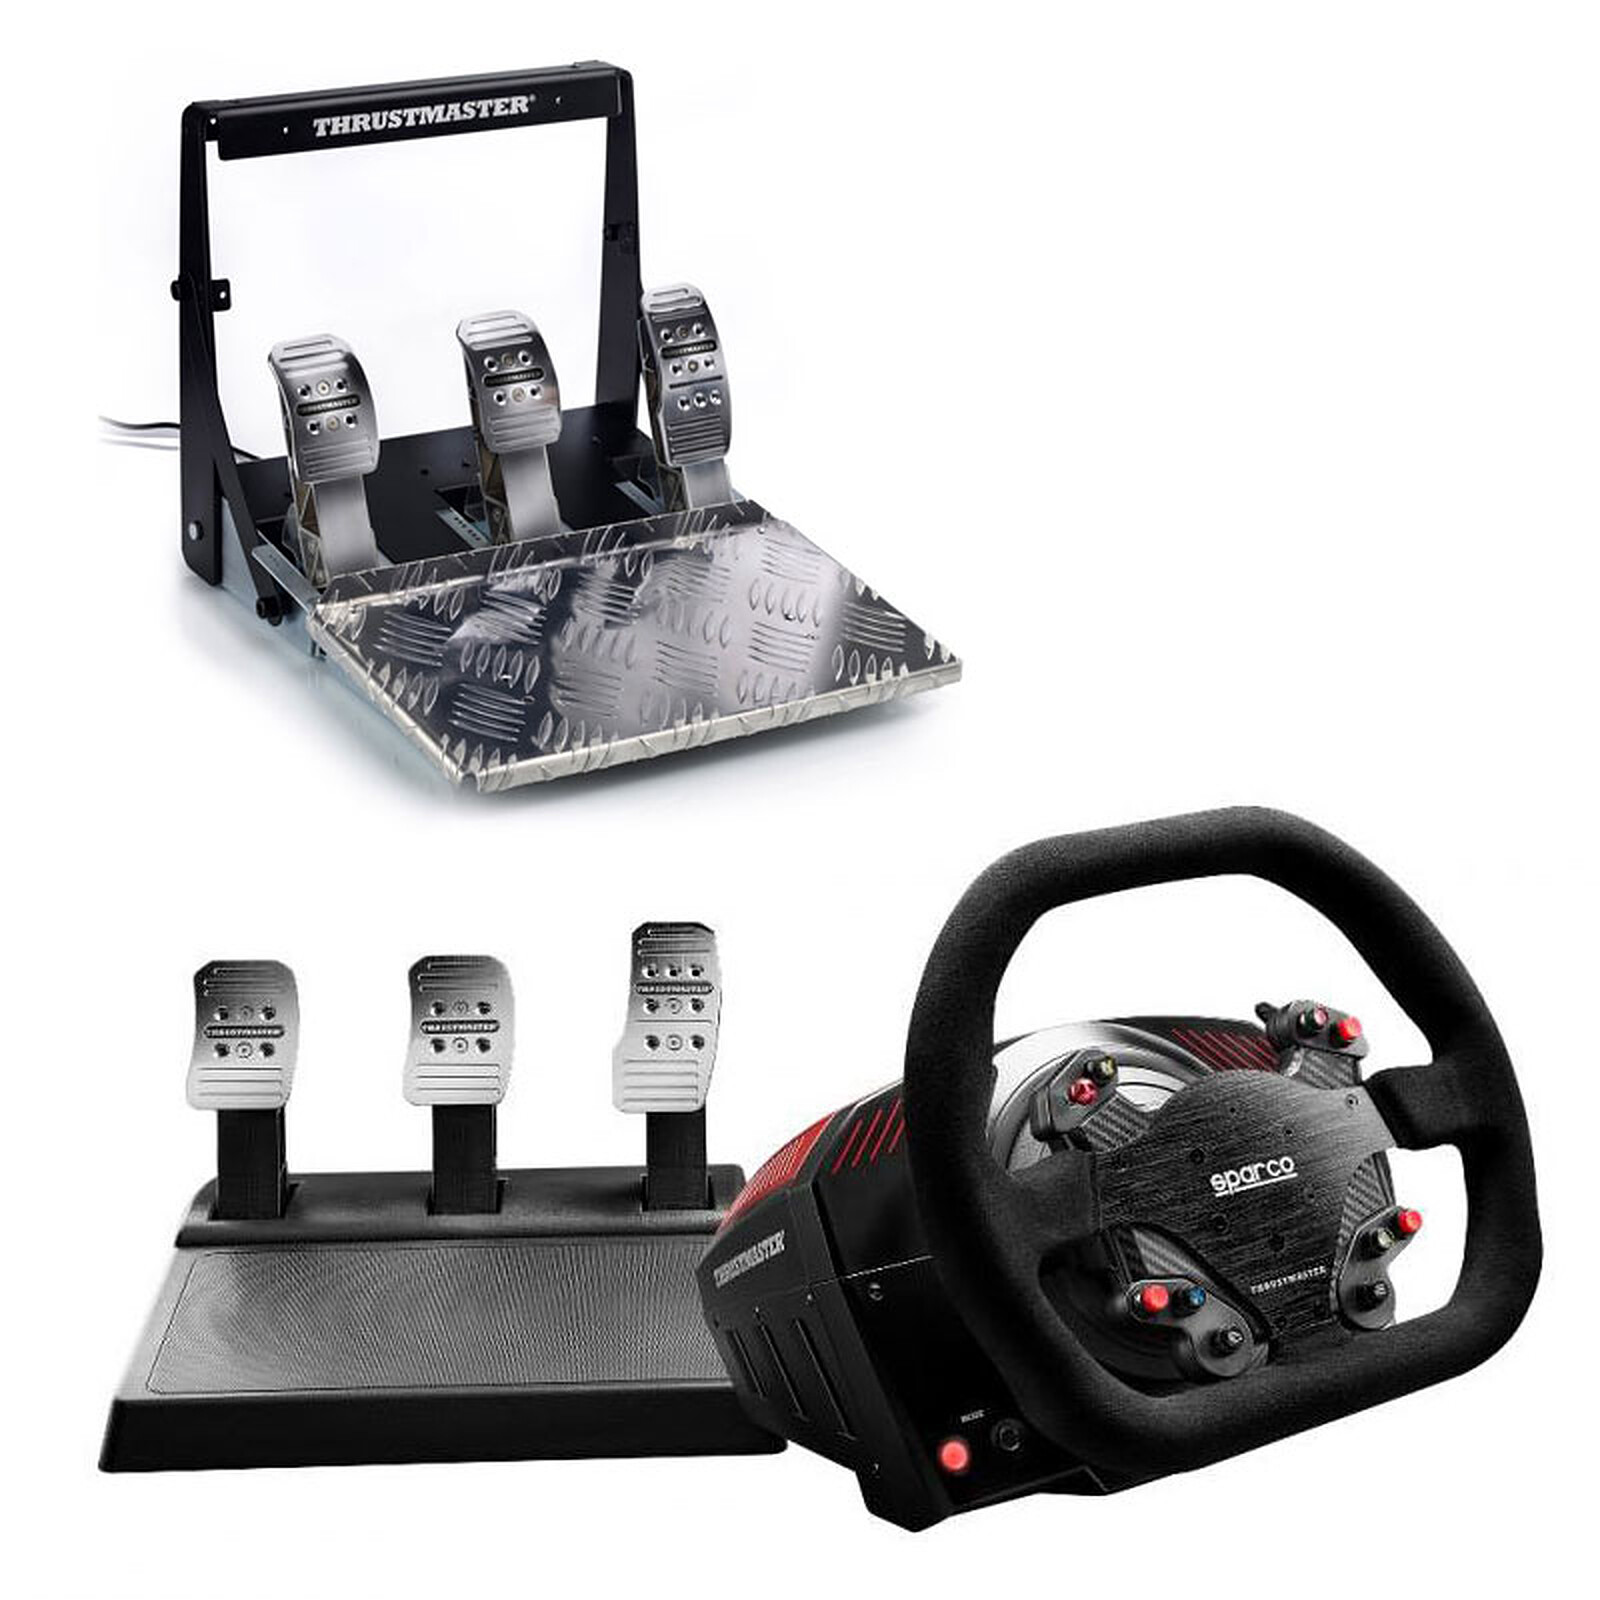 Thrustmaster TS-XW Racer Sparco + Thrustmaster T3PA Pro Add-on